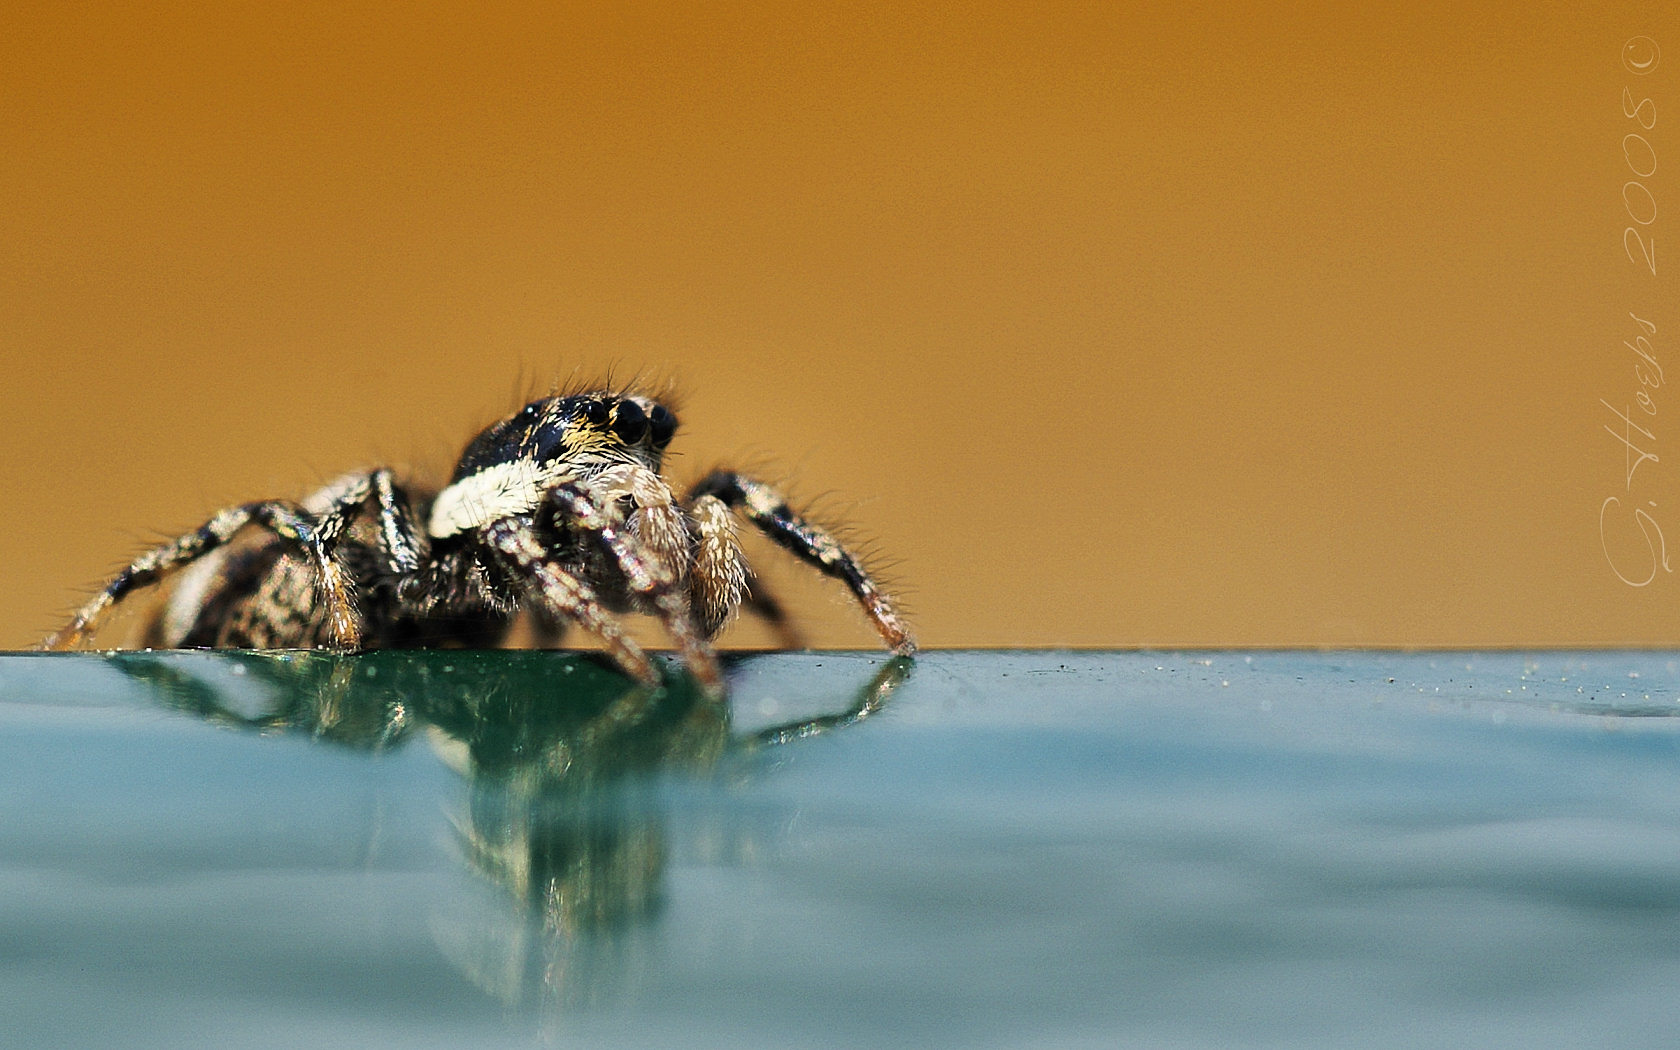 Jumping Spider 1680x1050